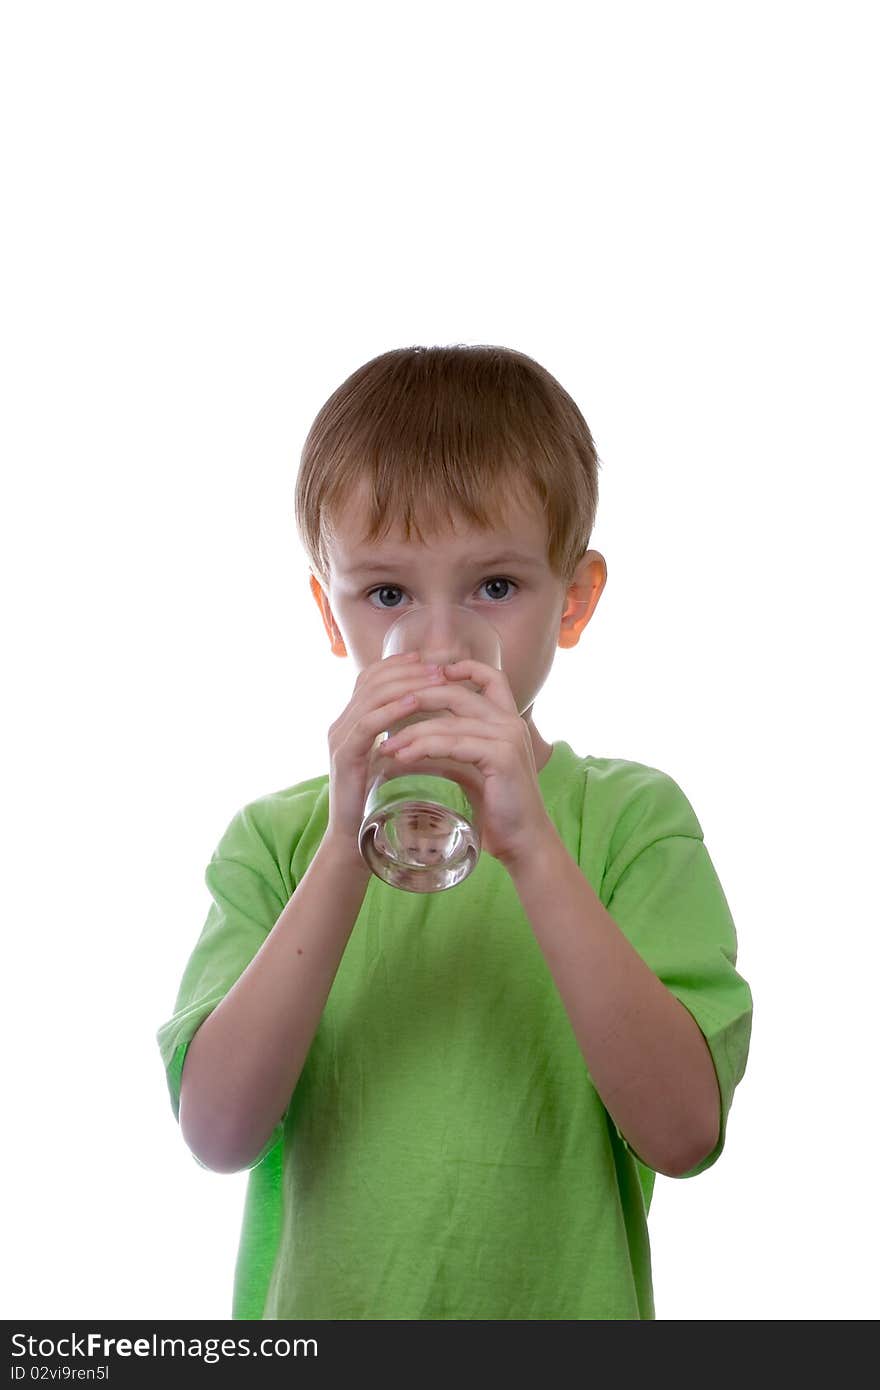 Boy drinks water from a glass on a white background